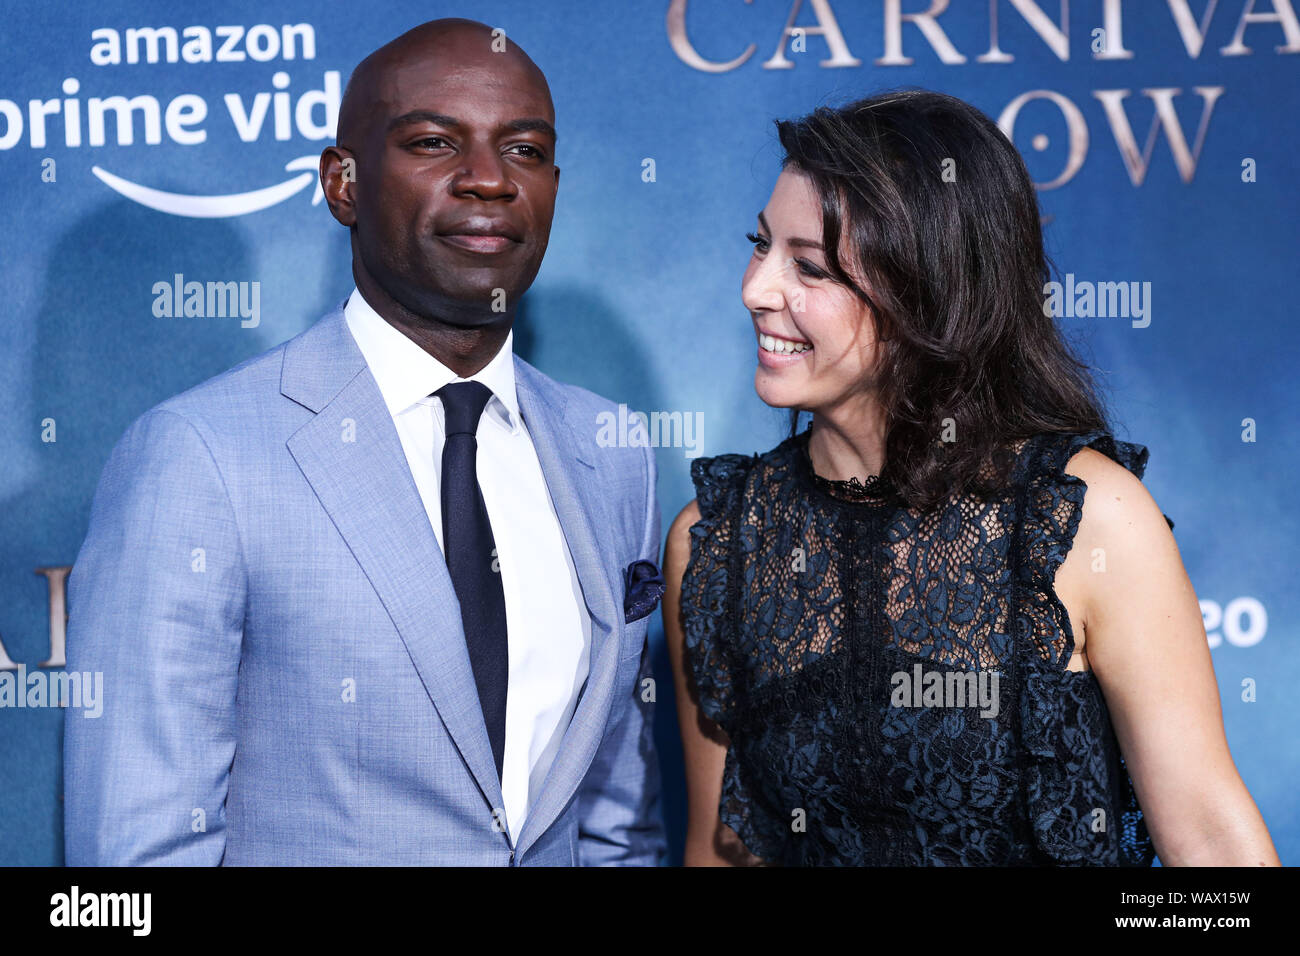 HOLLYWOOD, LOS ANGELES, CALIFORNIA, USA - AUGUST 21: Actor David Gyasi and Emma Gyasi arrive at the Los Angeles Premiere Of Amazon's 'Carnival Row' held at the TCL Chinese Theatre IMAX on August 21, 2019 in Hollywood, Los Angeles, California, United States. (Photo by Xavier Collin/Image Press Agency) Stock Photo